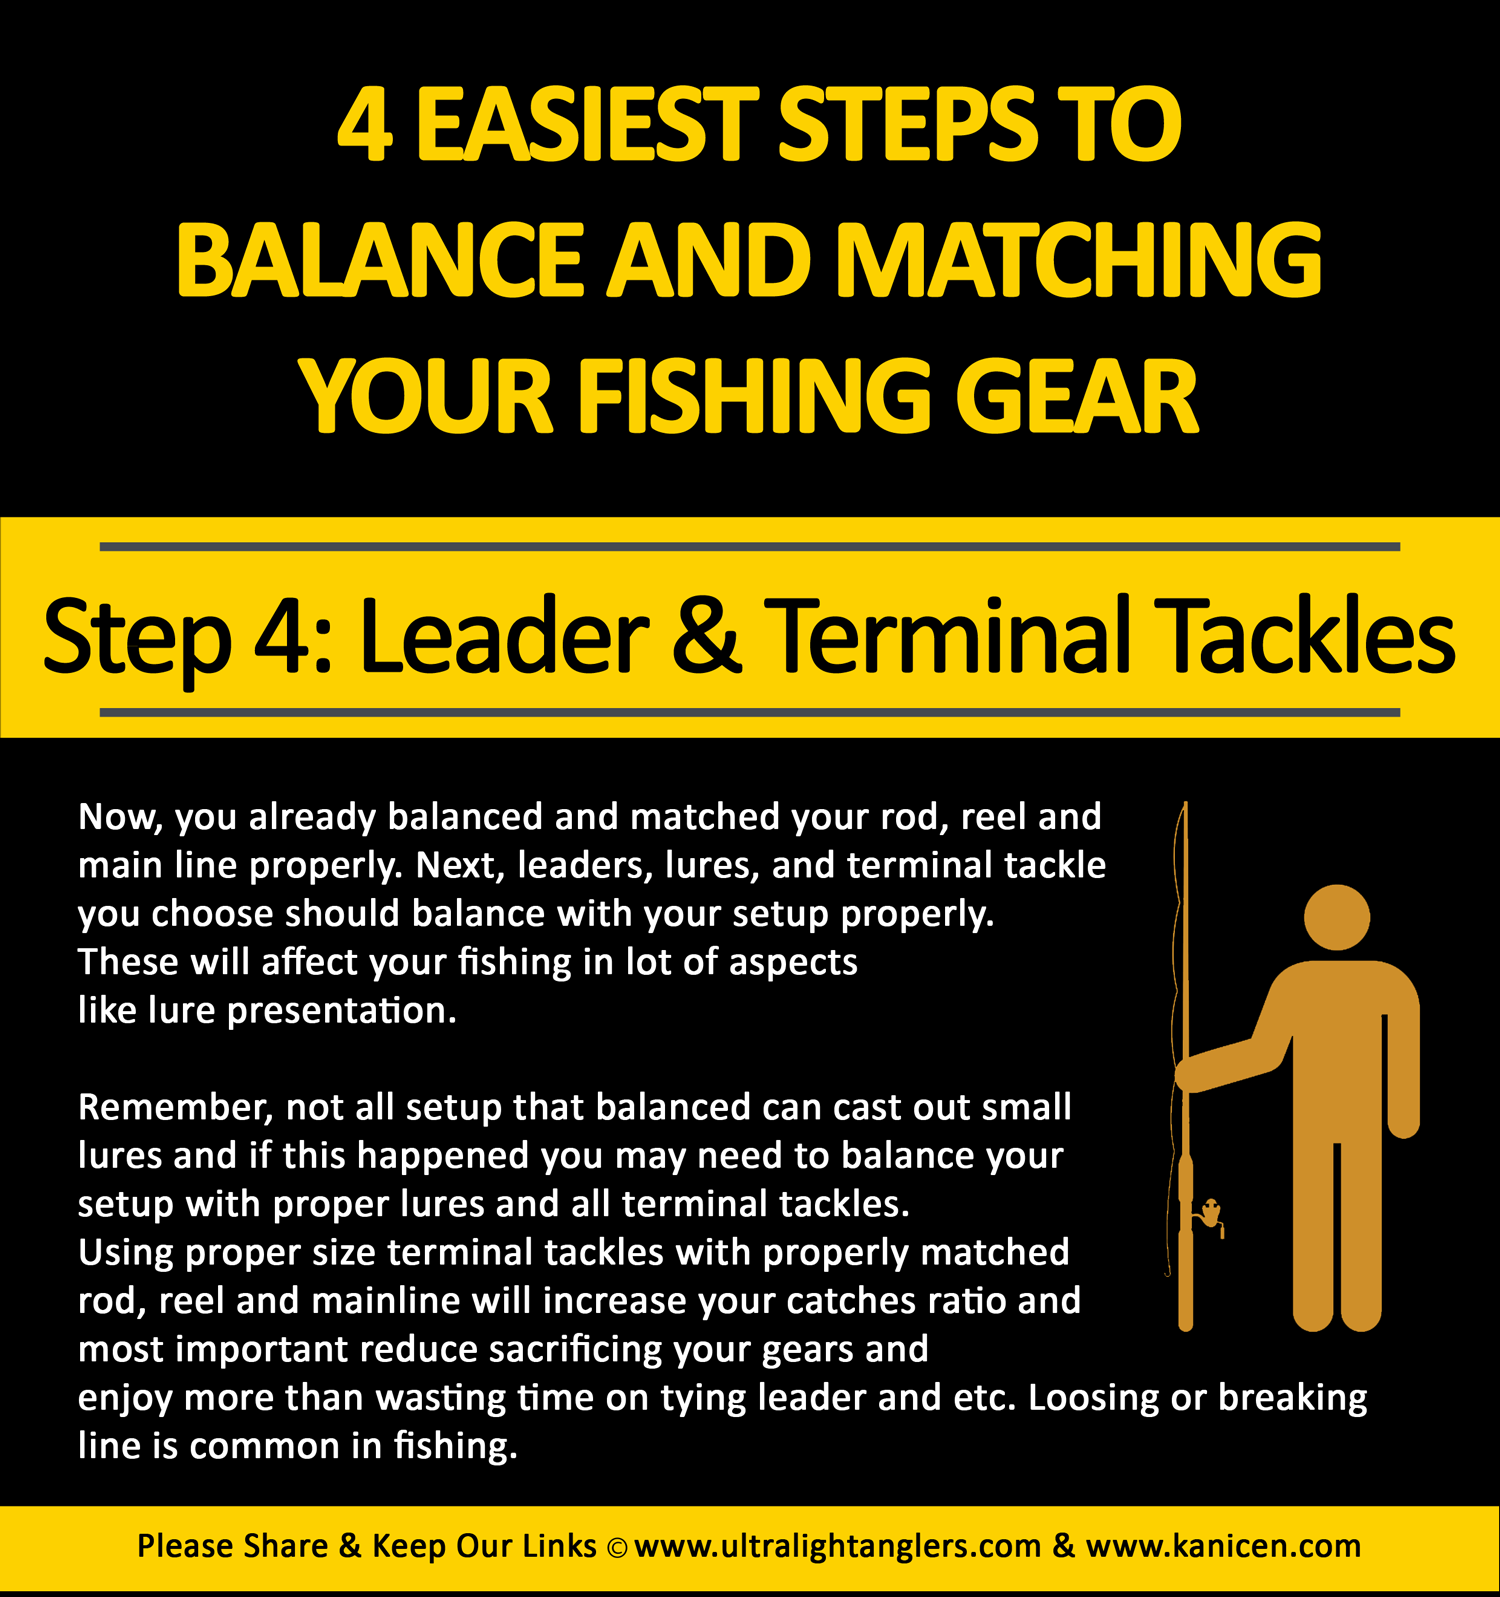 step-4-leader-and-terminal-tackles-selection-steps-balance-and-matching-your-fishing-gears